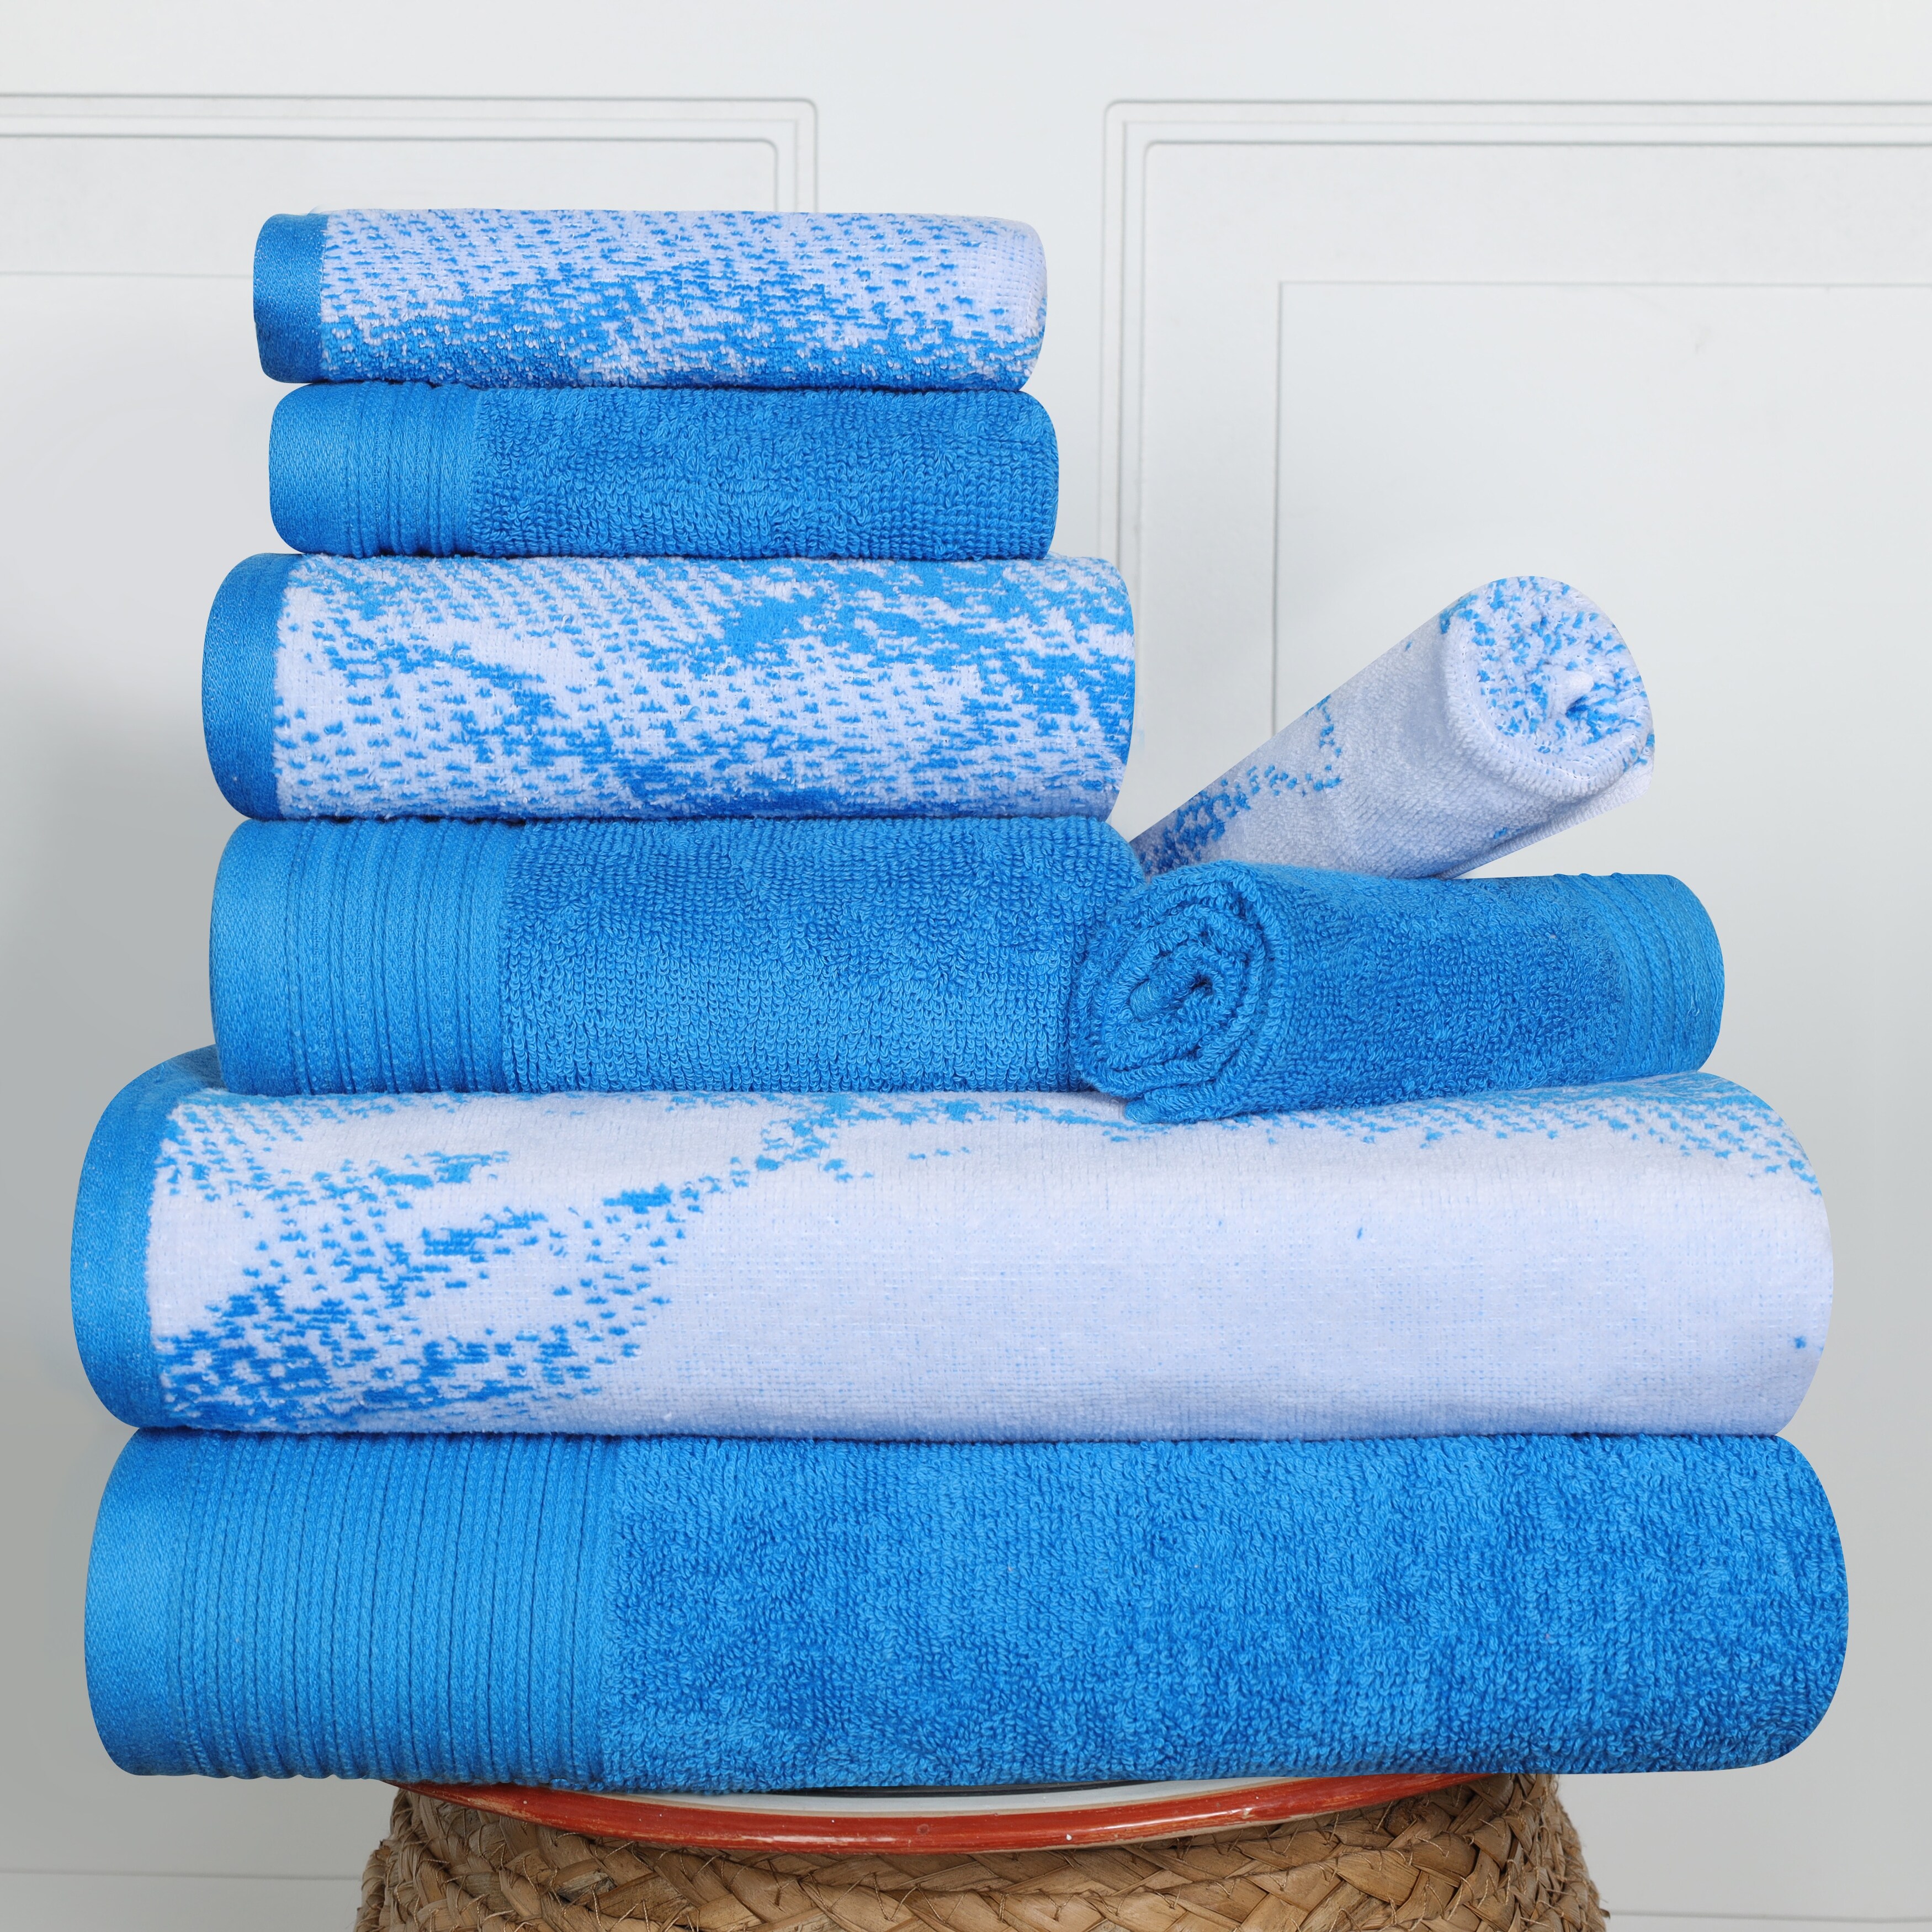 Superior Marble Effect Cotton Absorbent Textured 10 Piece Towel Set